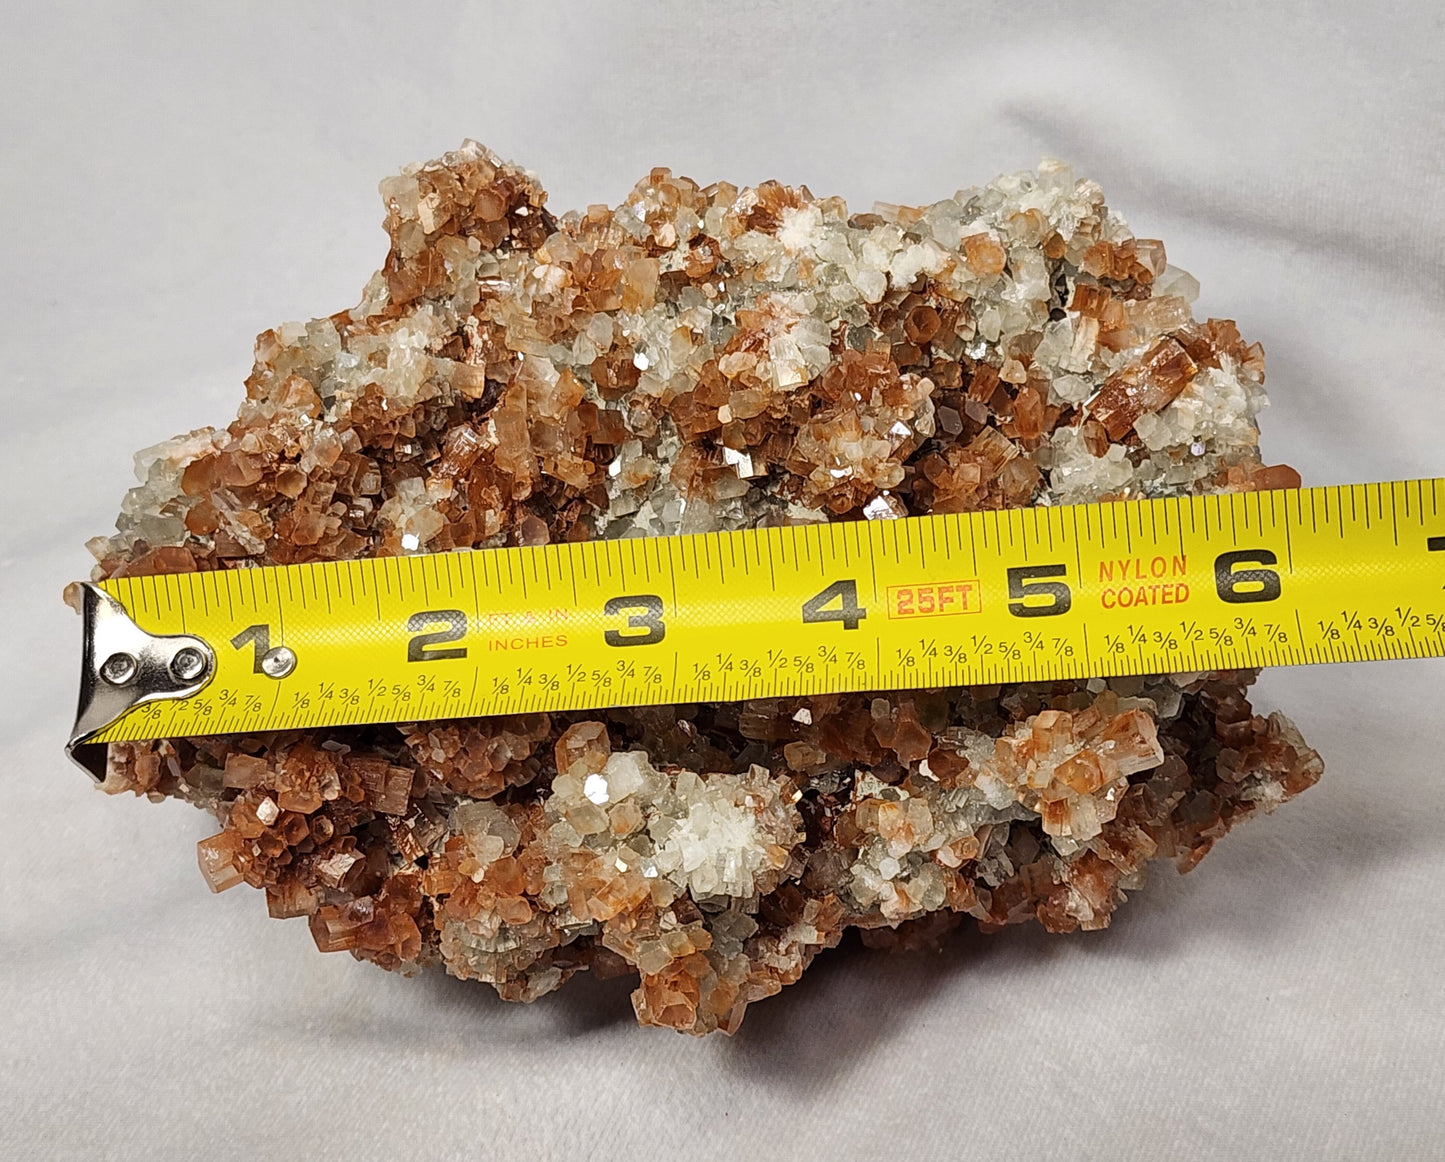 Two Toned Aragonite Cluster